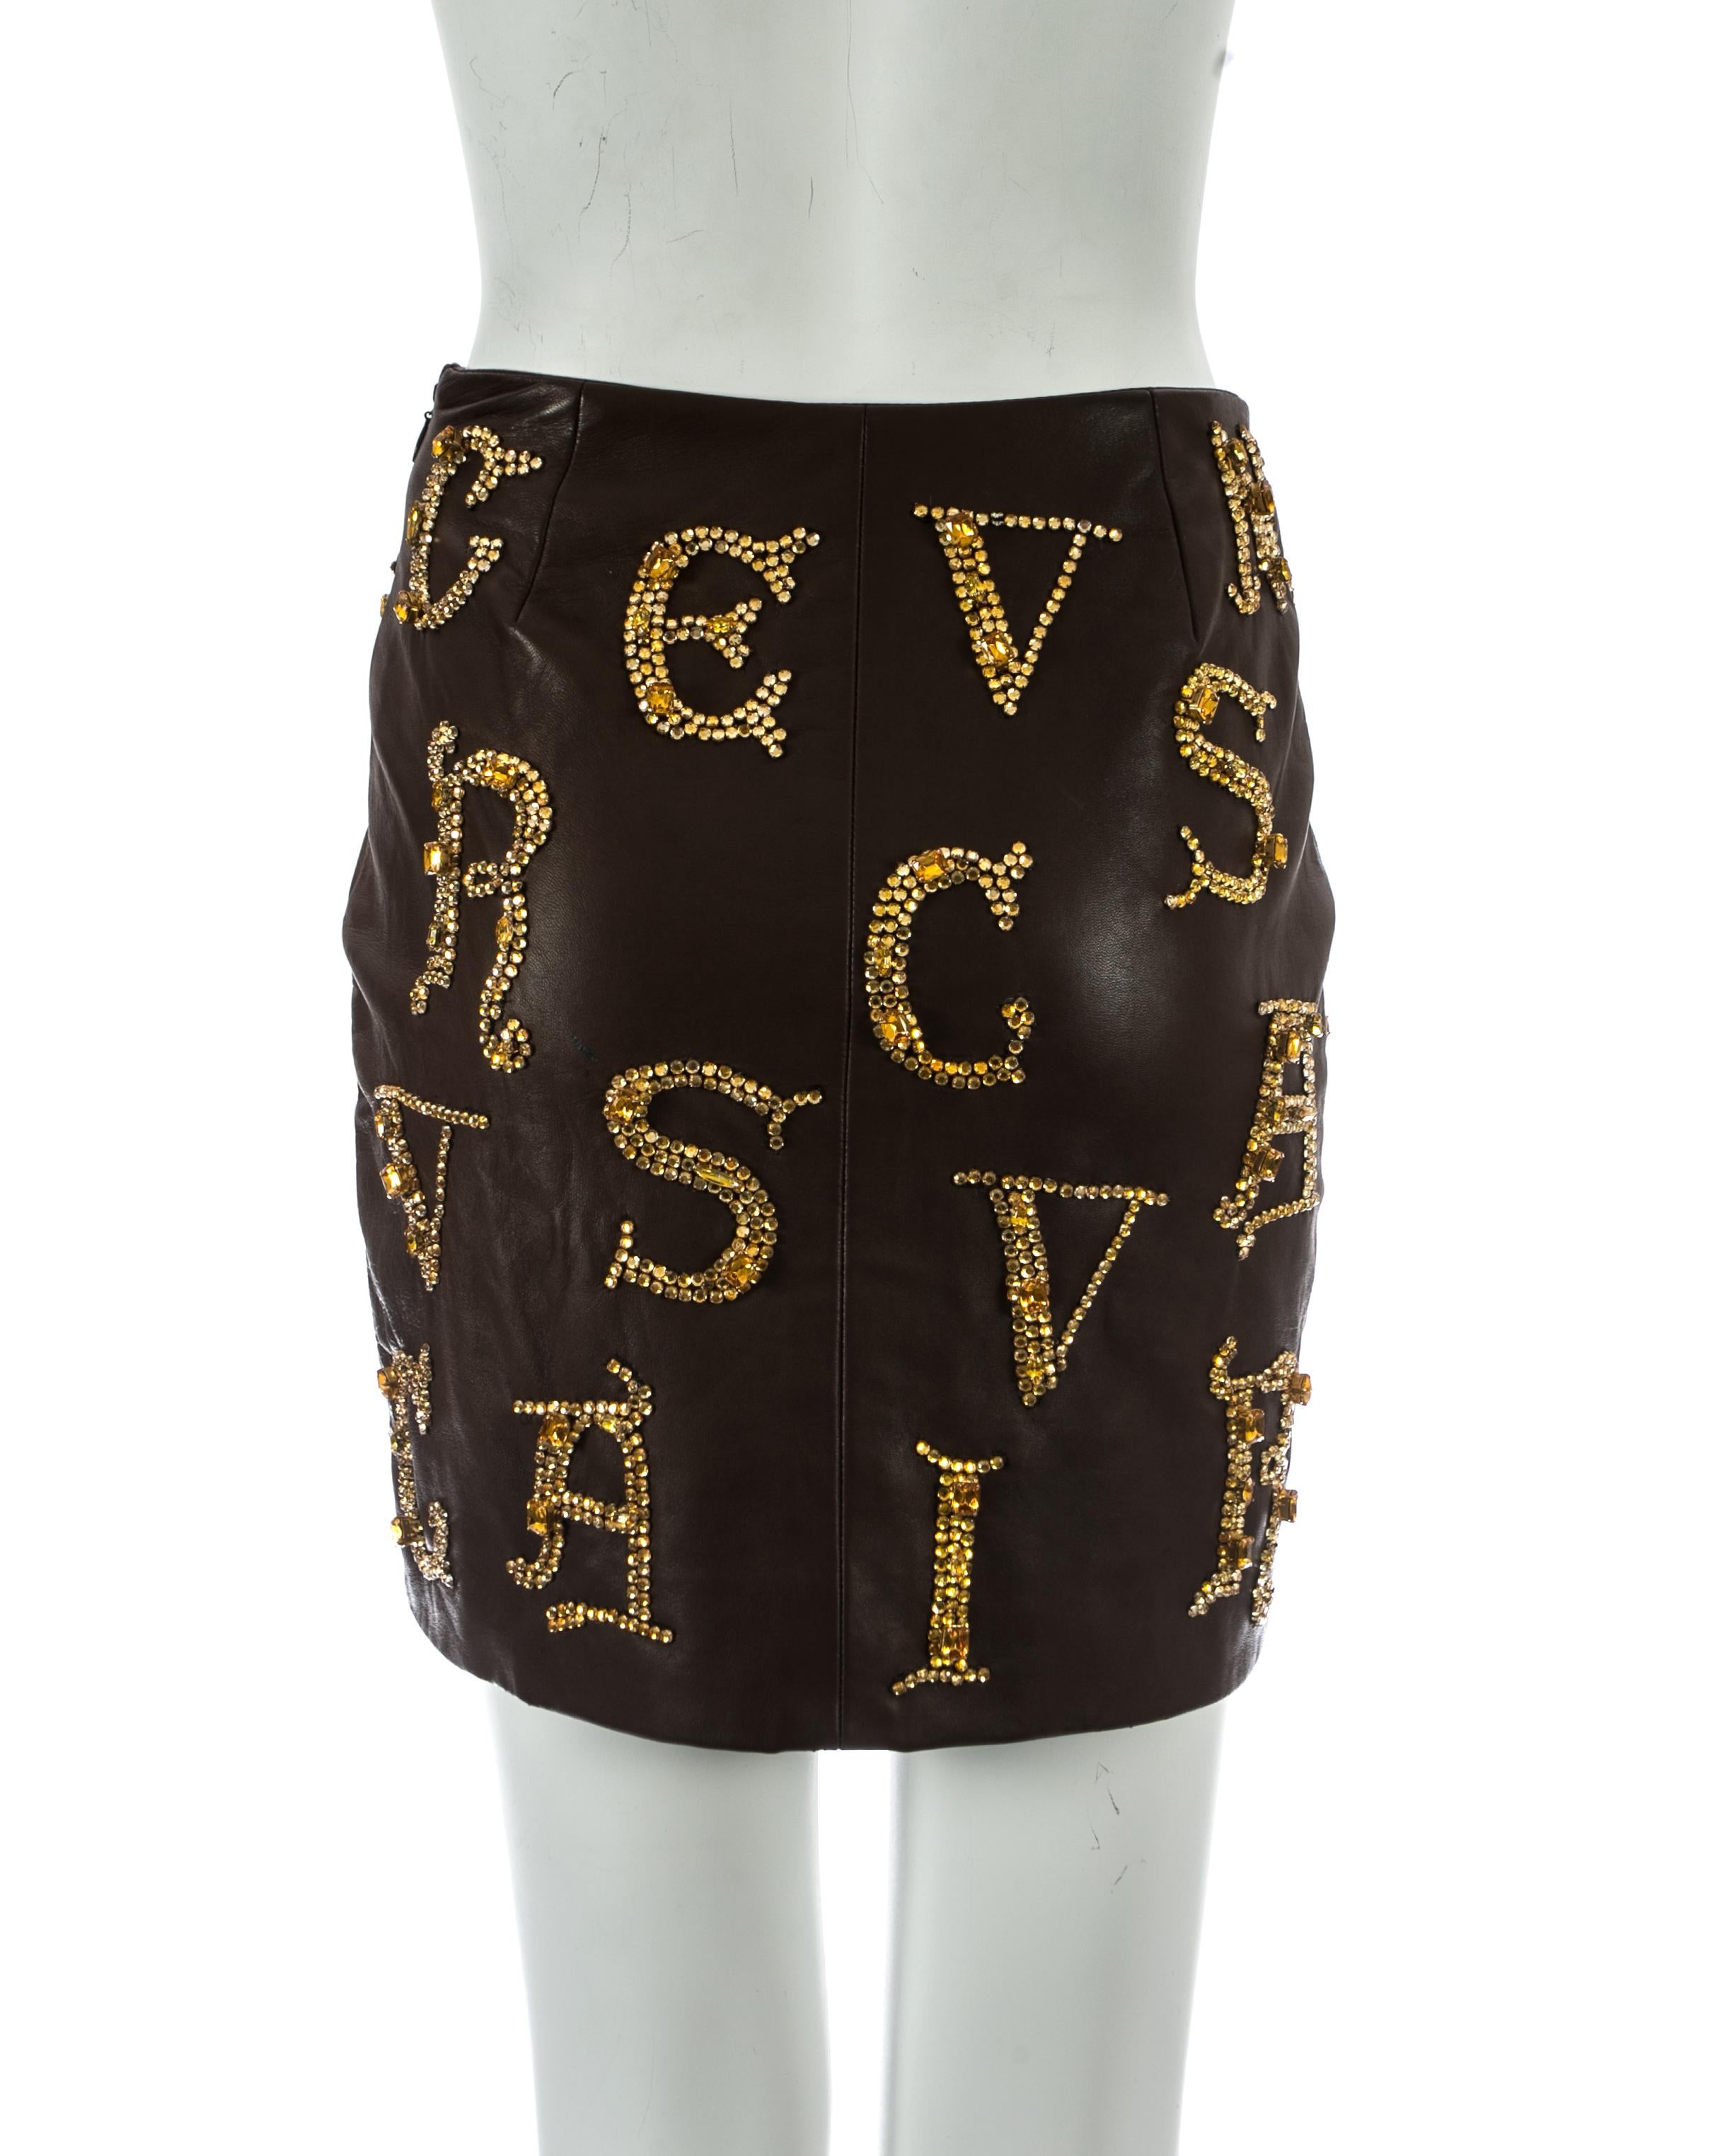 Gianni Versace brown leather skirt with gold crystal embellishment, fw 1997 For Sale 3